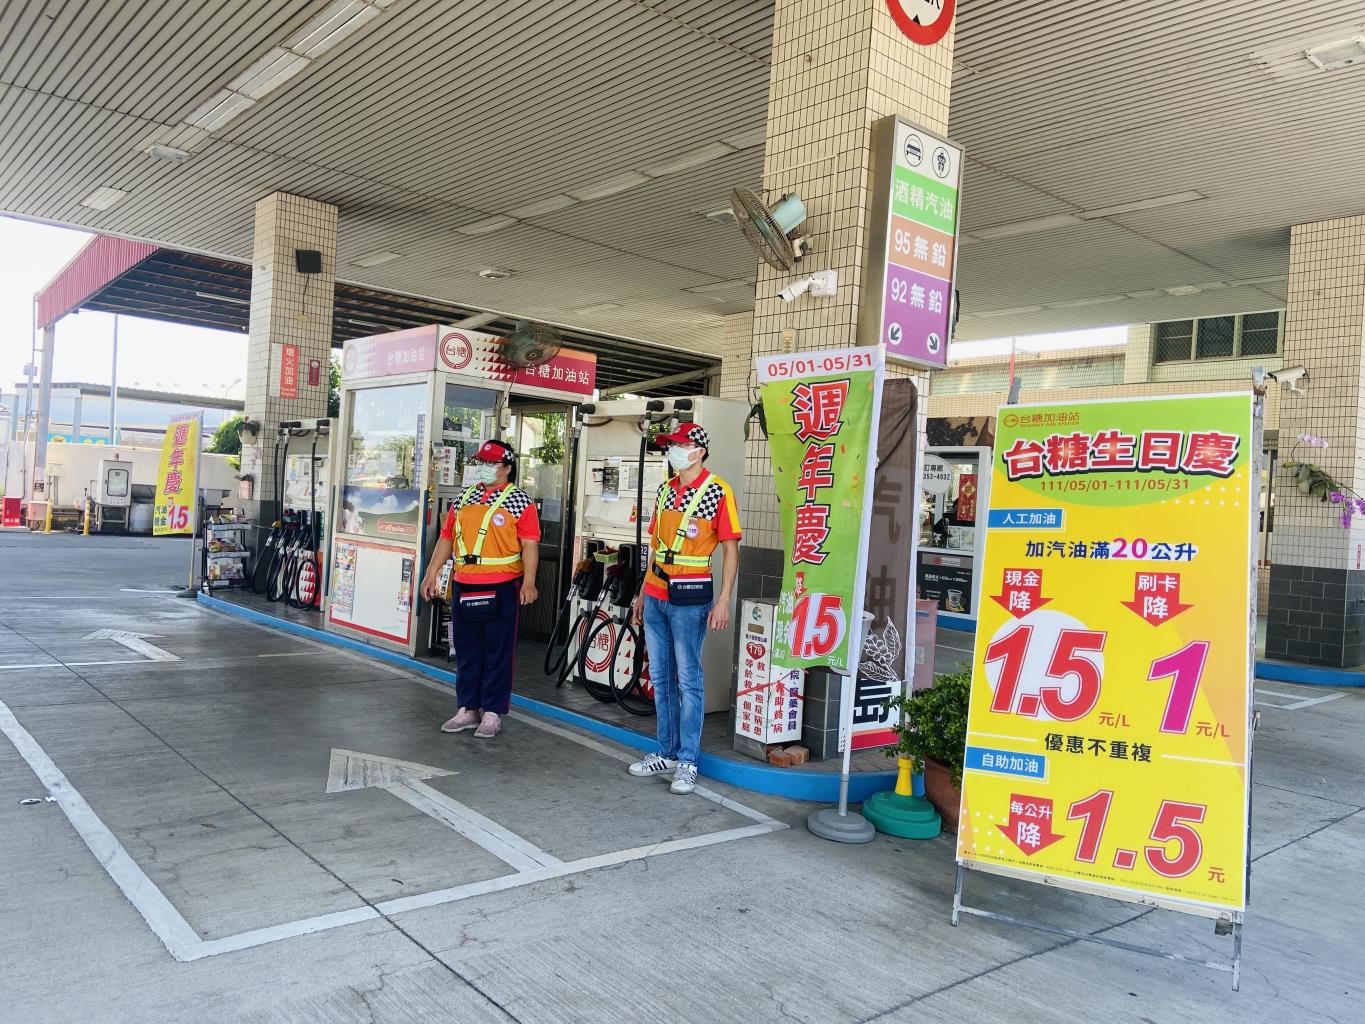 Gas up at TSC in May to get NT$1.5 off per liter for at least 20 liters gas paid in cash , NT$1.0 for credit card